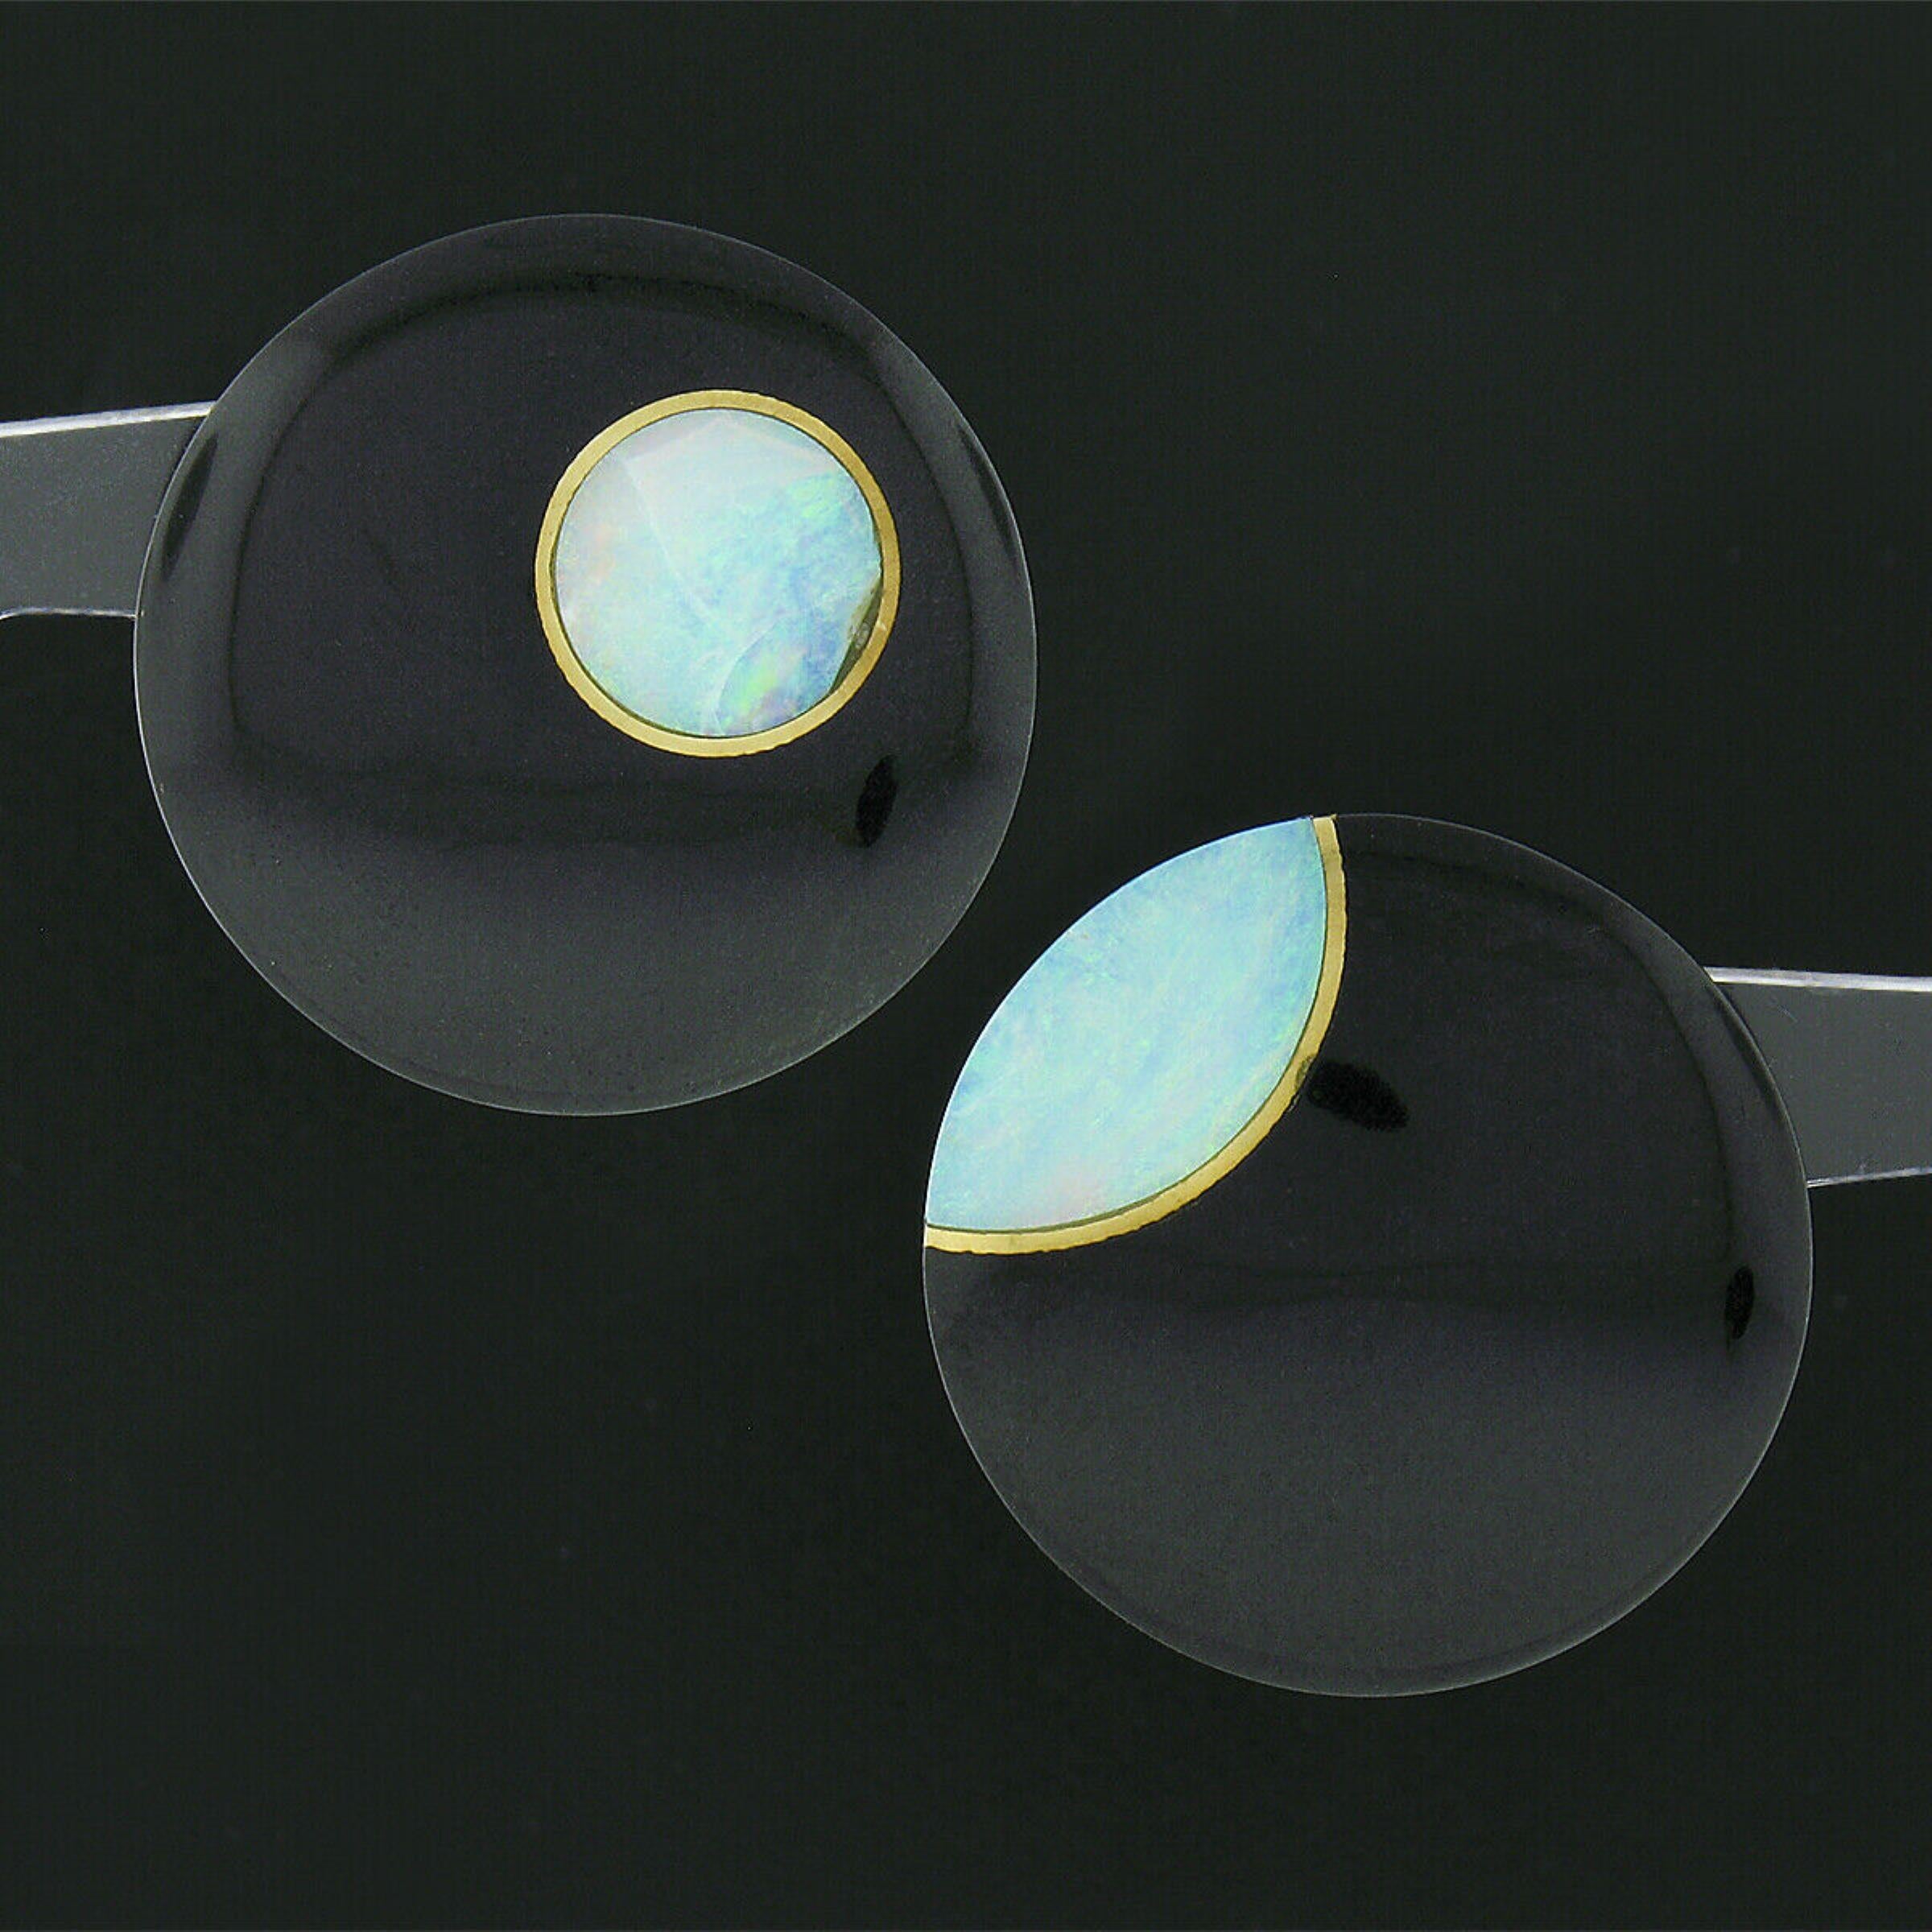 Here we have a vintage pair of Tiffany & Co. earrings that were crafted from solid 18k yellow gold with each featuring a large black onyx that is neatly set with a fine opal. The beautiful round cabochon cut onyx are substantial in size and are